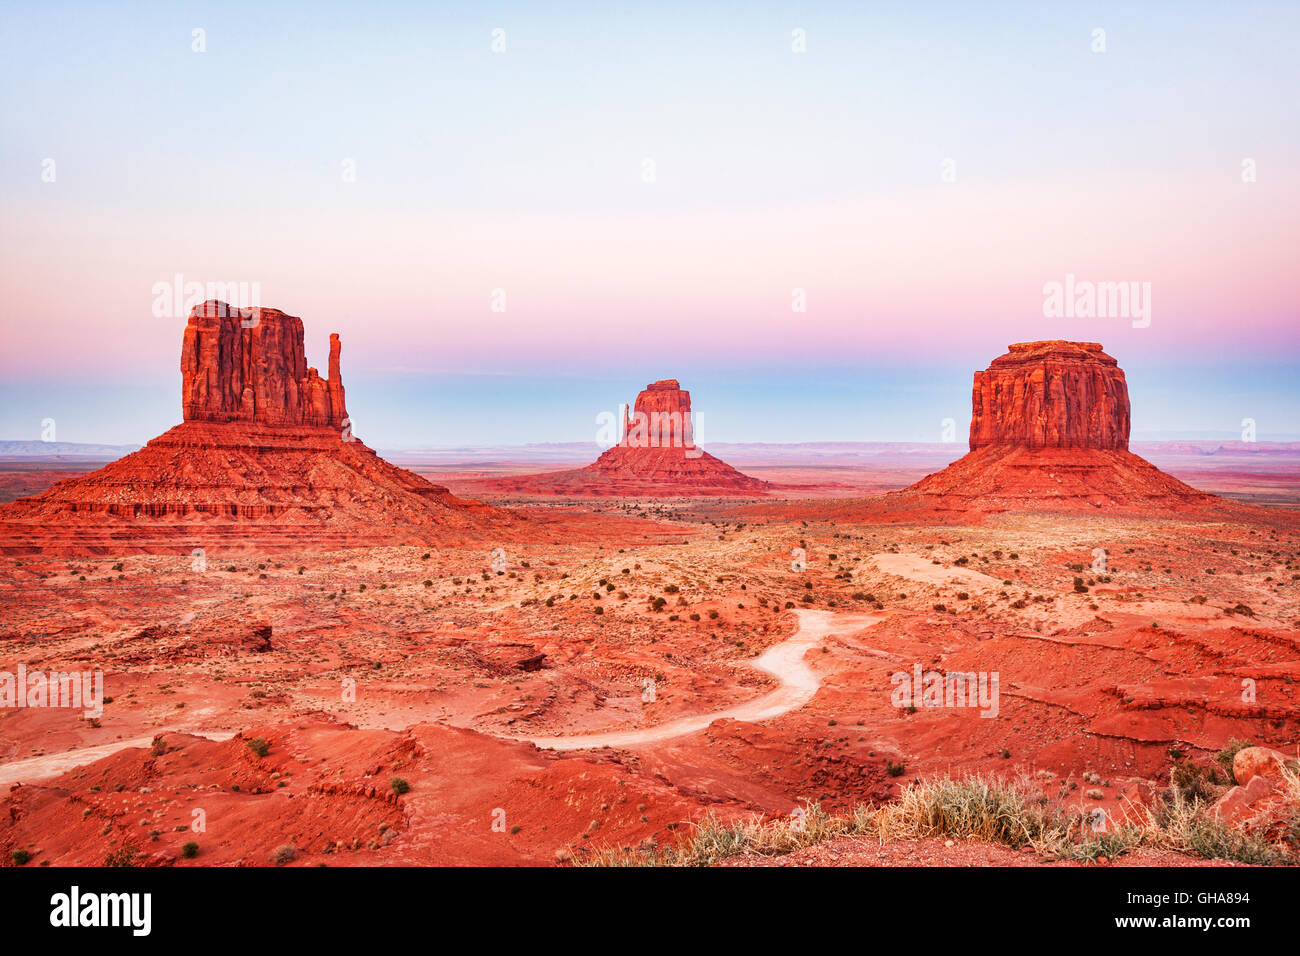 Merrick Butte and the Mitten Buttes, Monument Valley, Arizona, USA Stock Photo